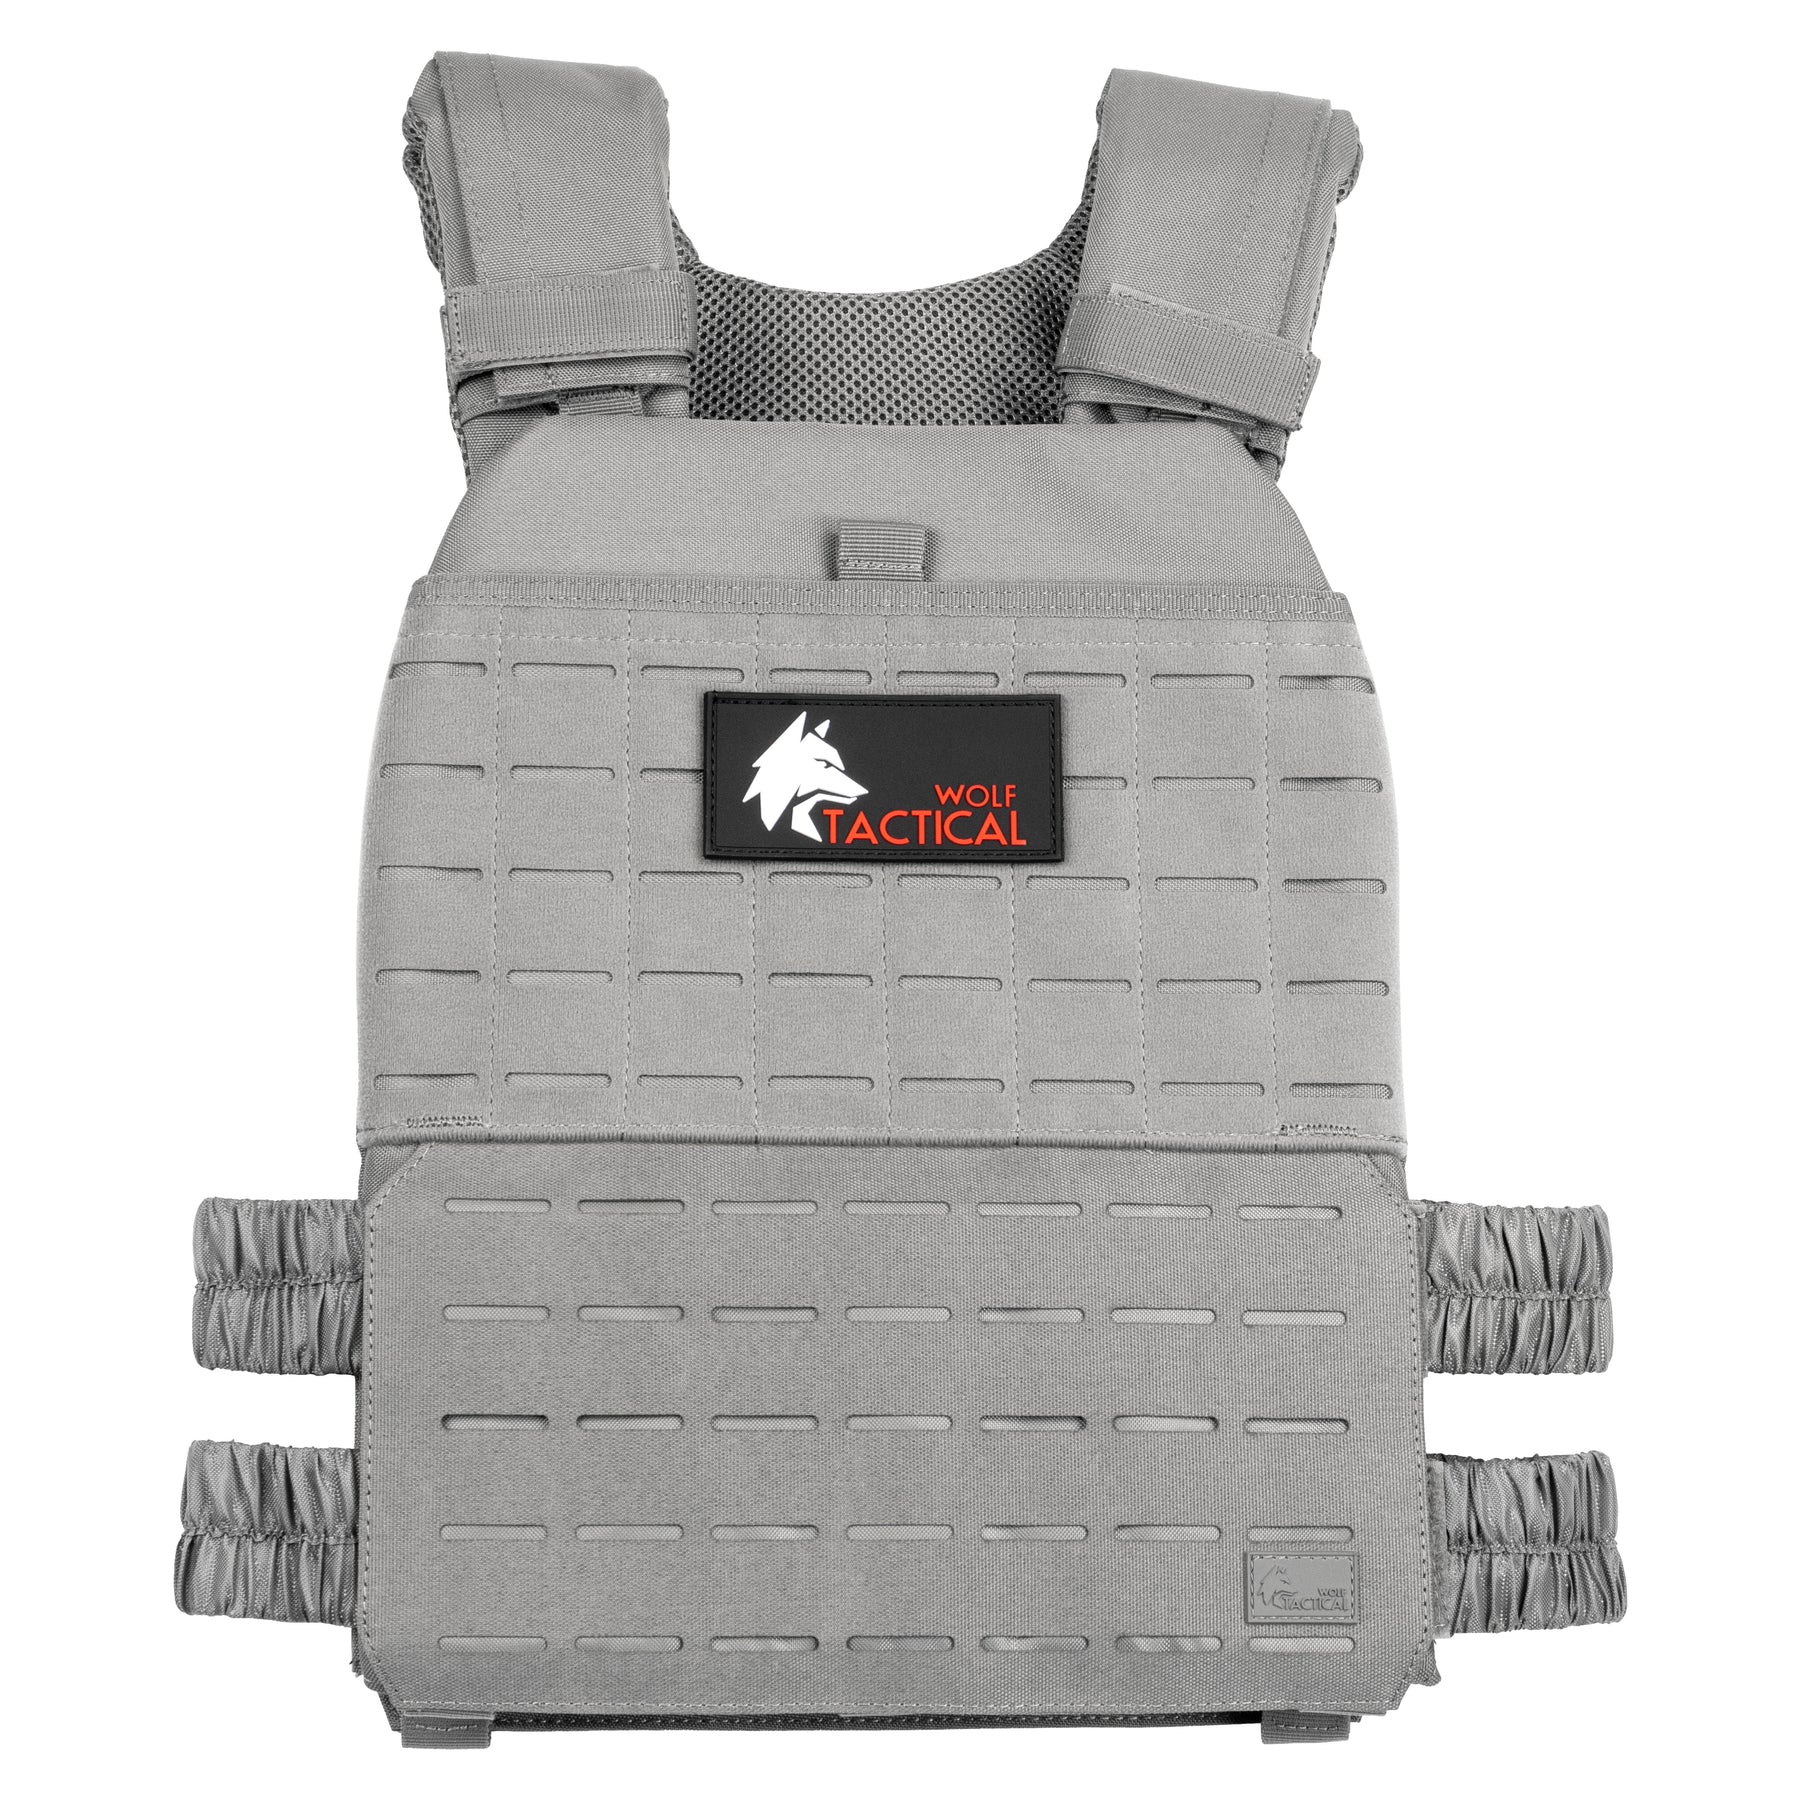 Wolf Tactical Adjustable Weighted Vest - WODs Strength and Endurance Training Fitness Workouts Running